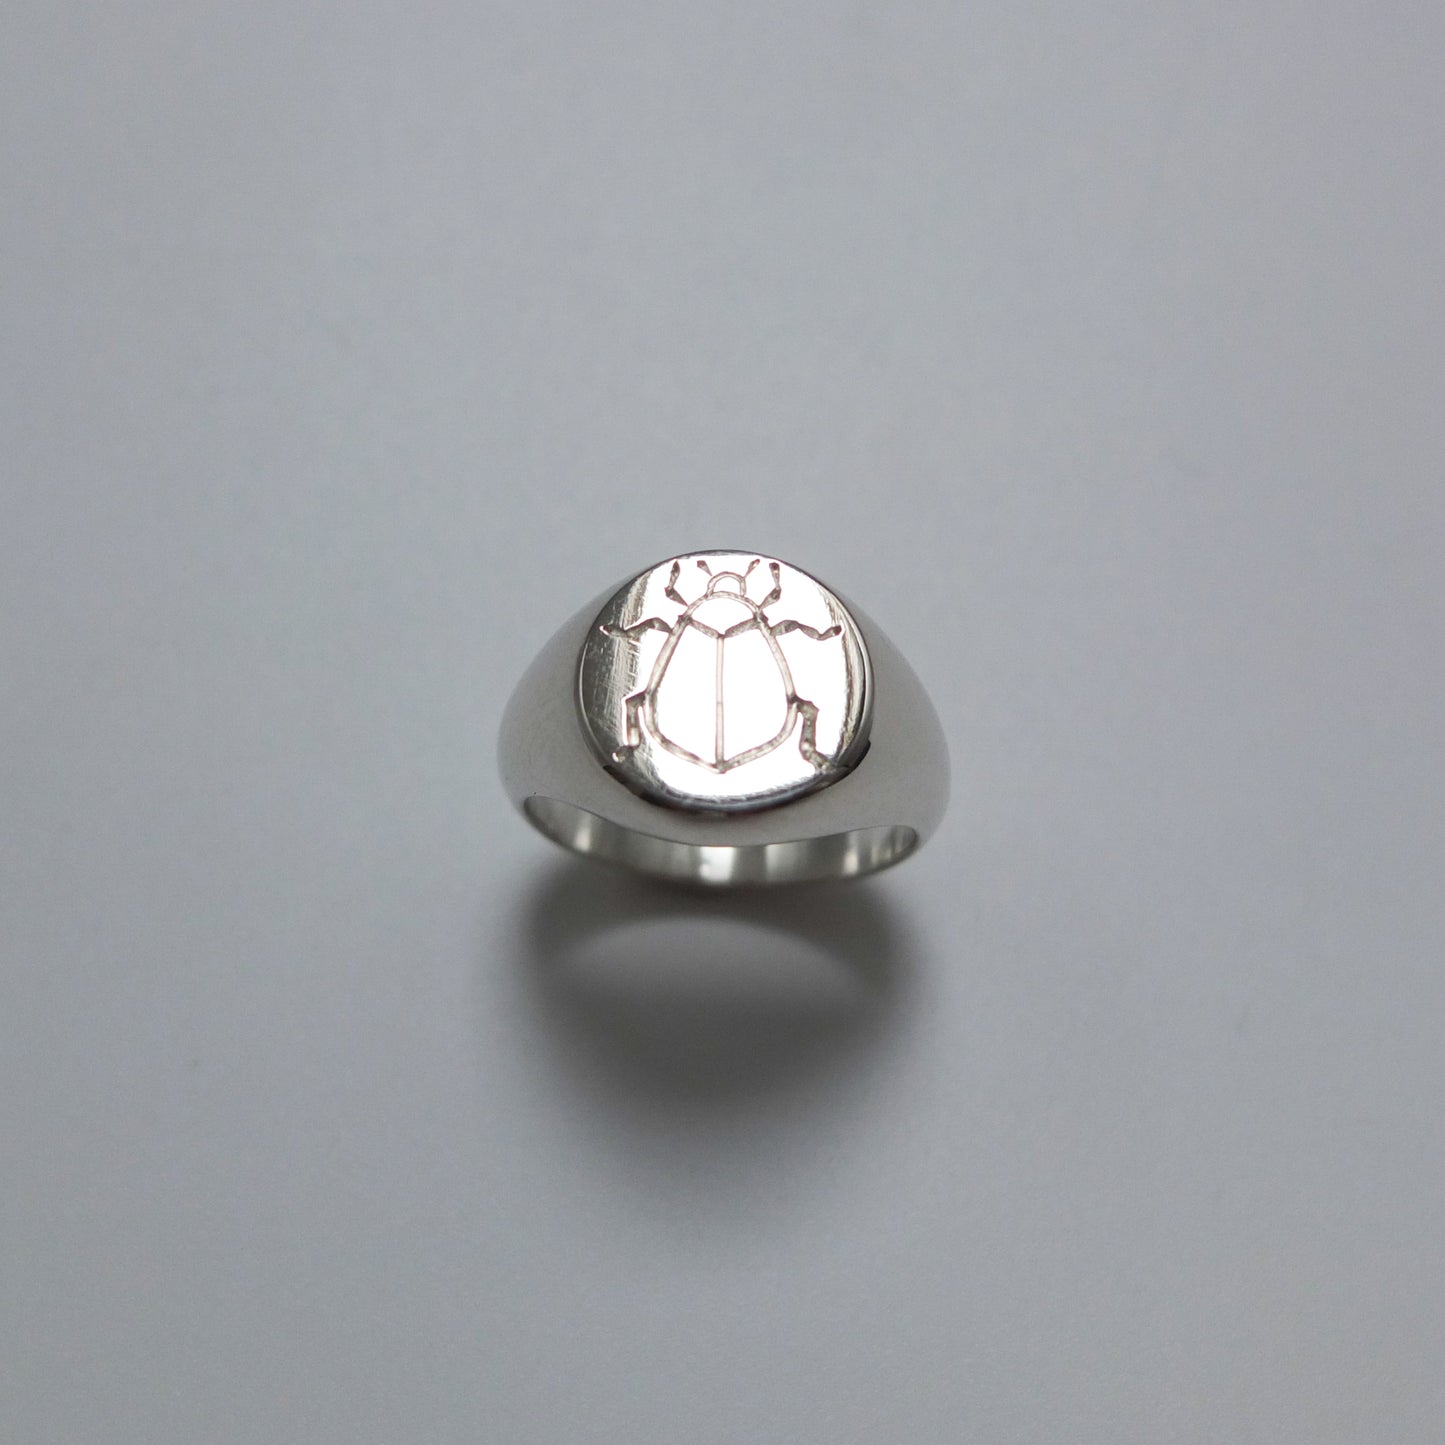 Silver Beetle Signet ring